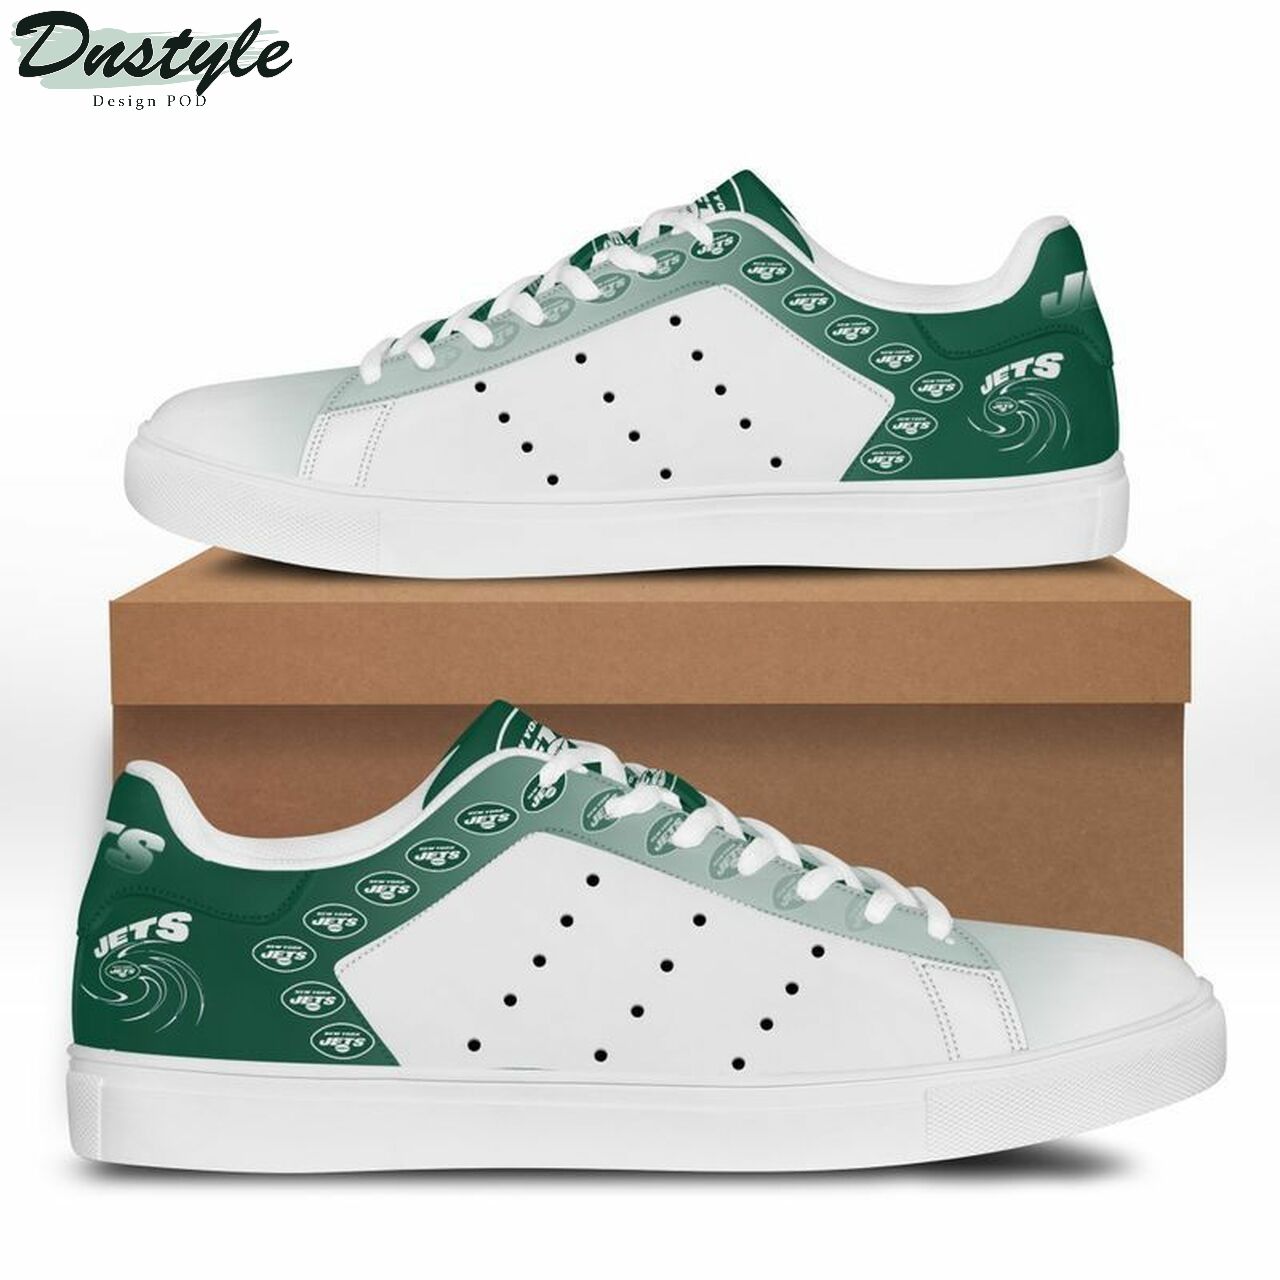 New York Jets NFL stan smith low top skate shoes